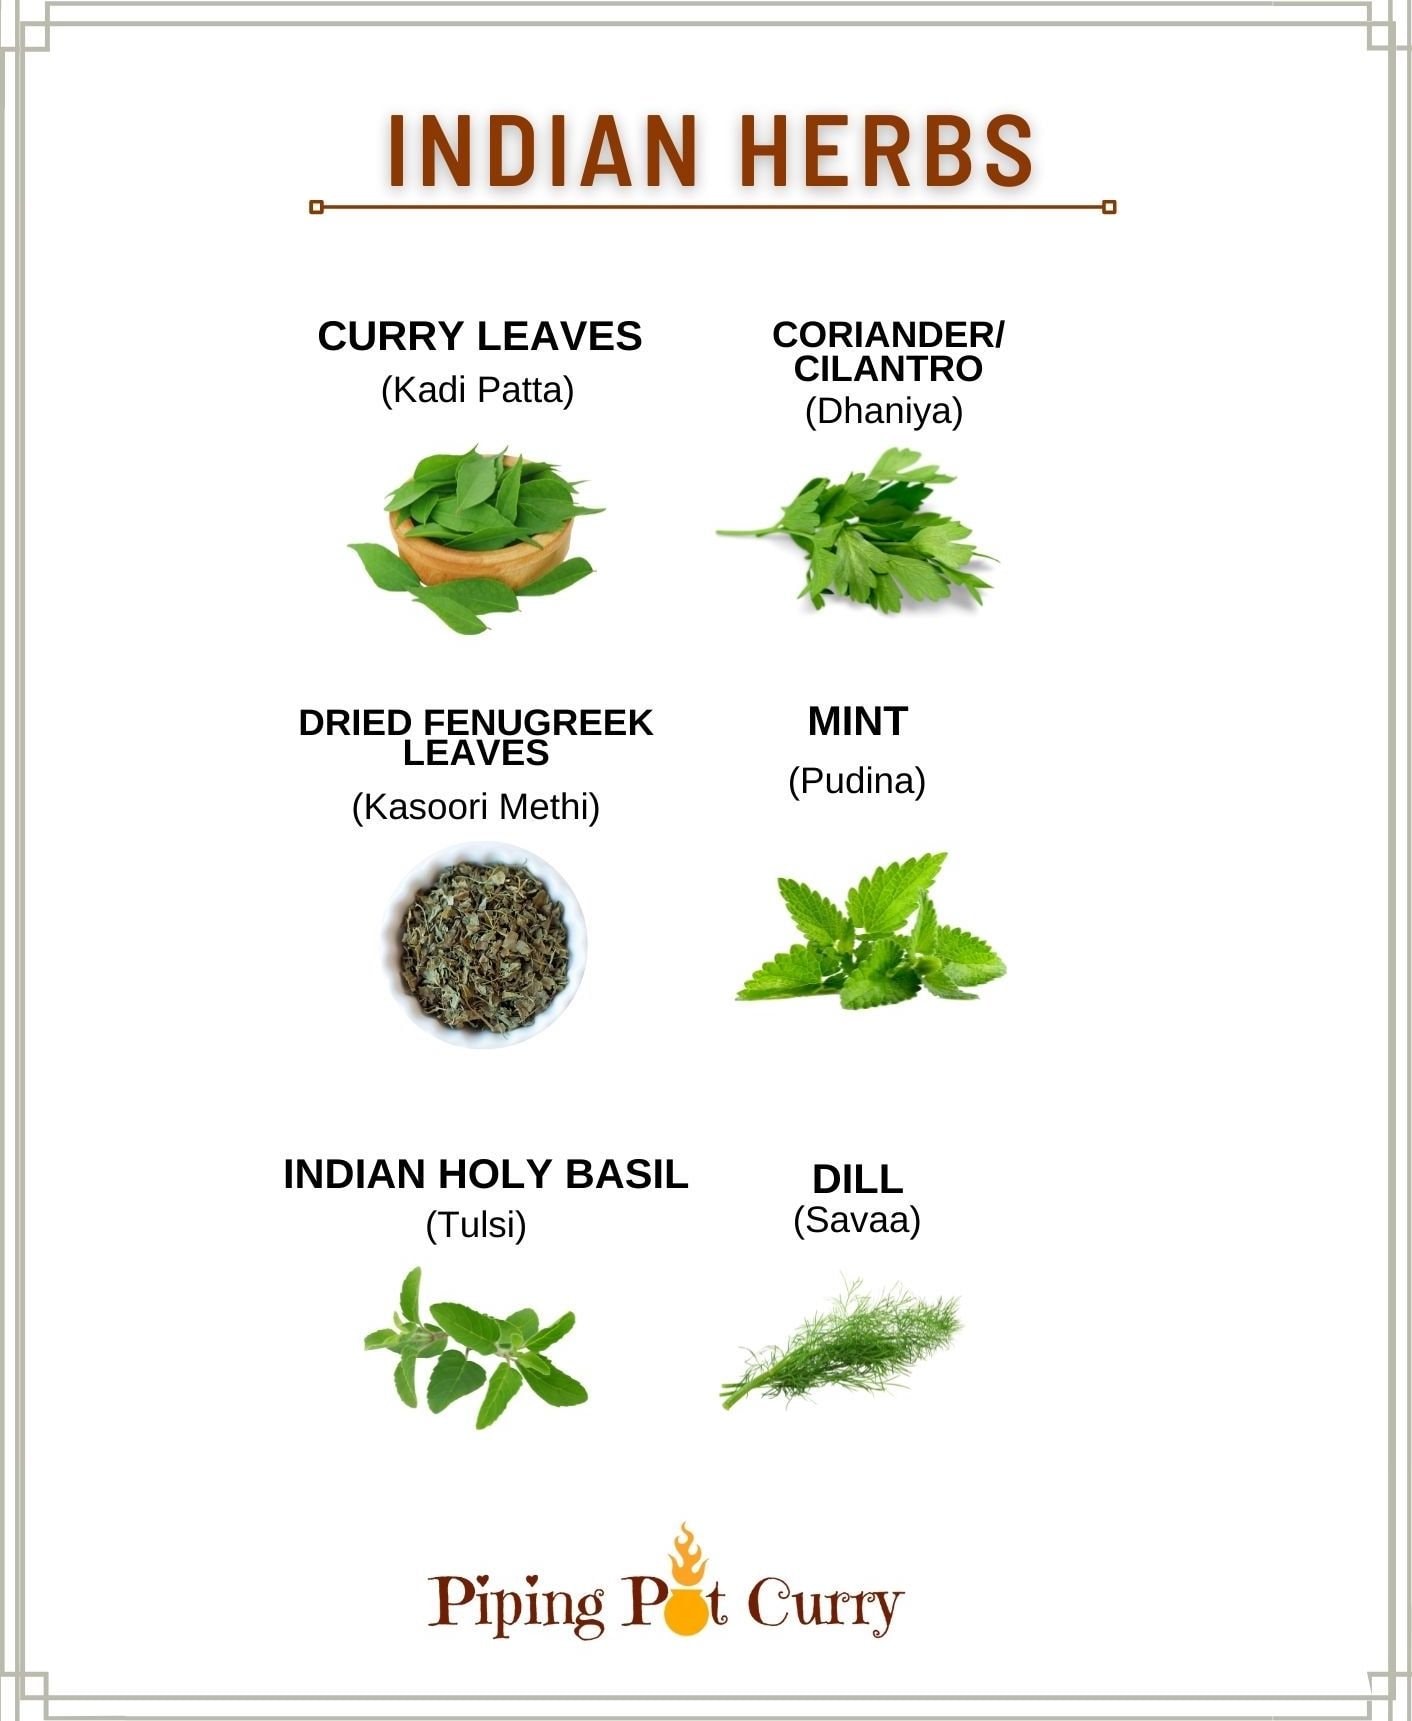 Indian herbs images and names in English and hindi